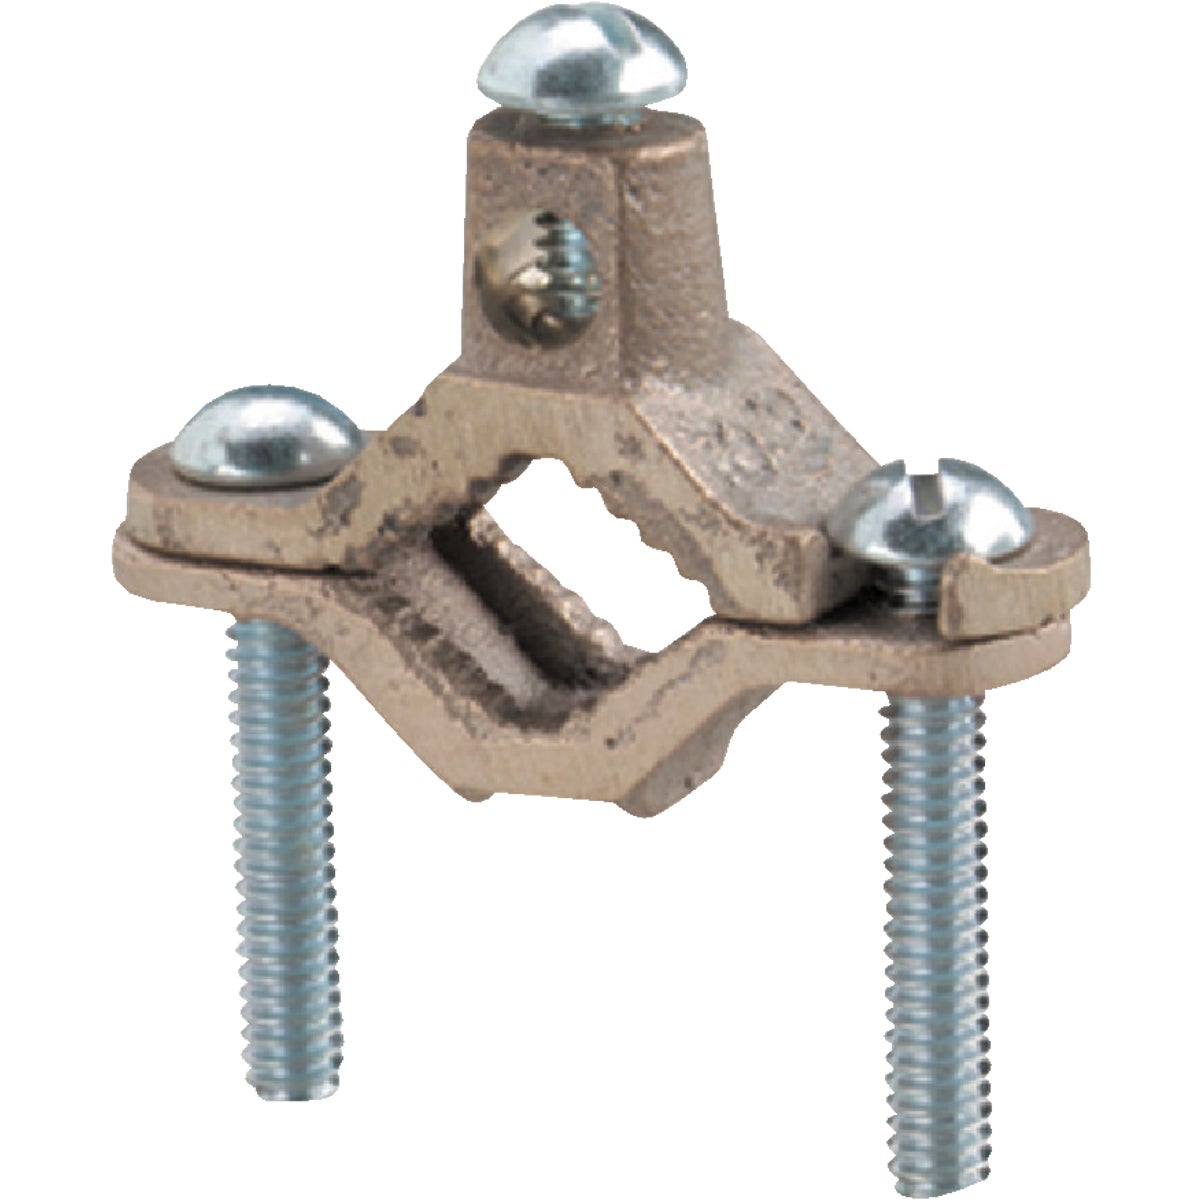 Item 510423, Set screw type serrated clamp that swings apart for easy installation.